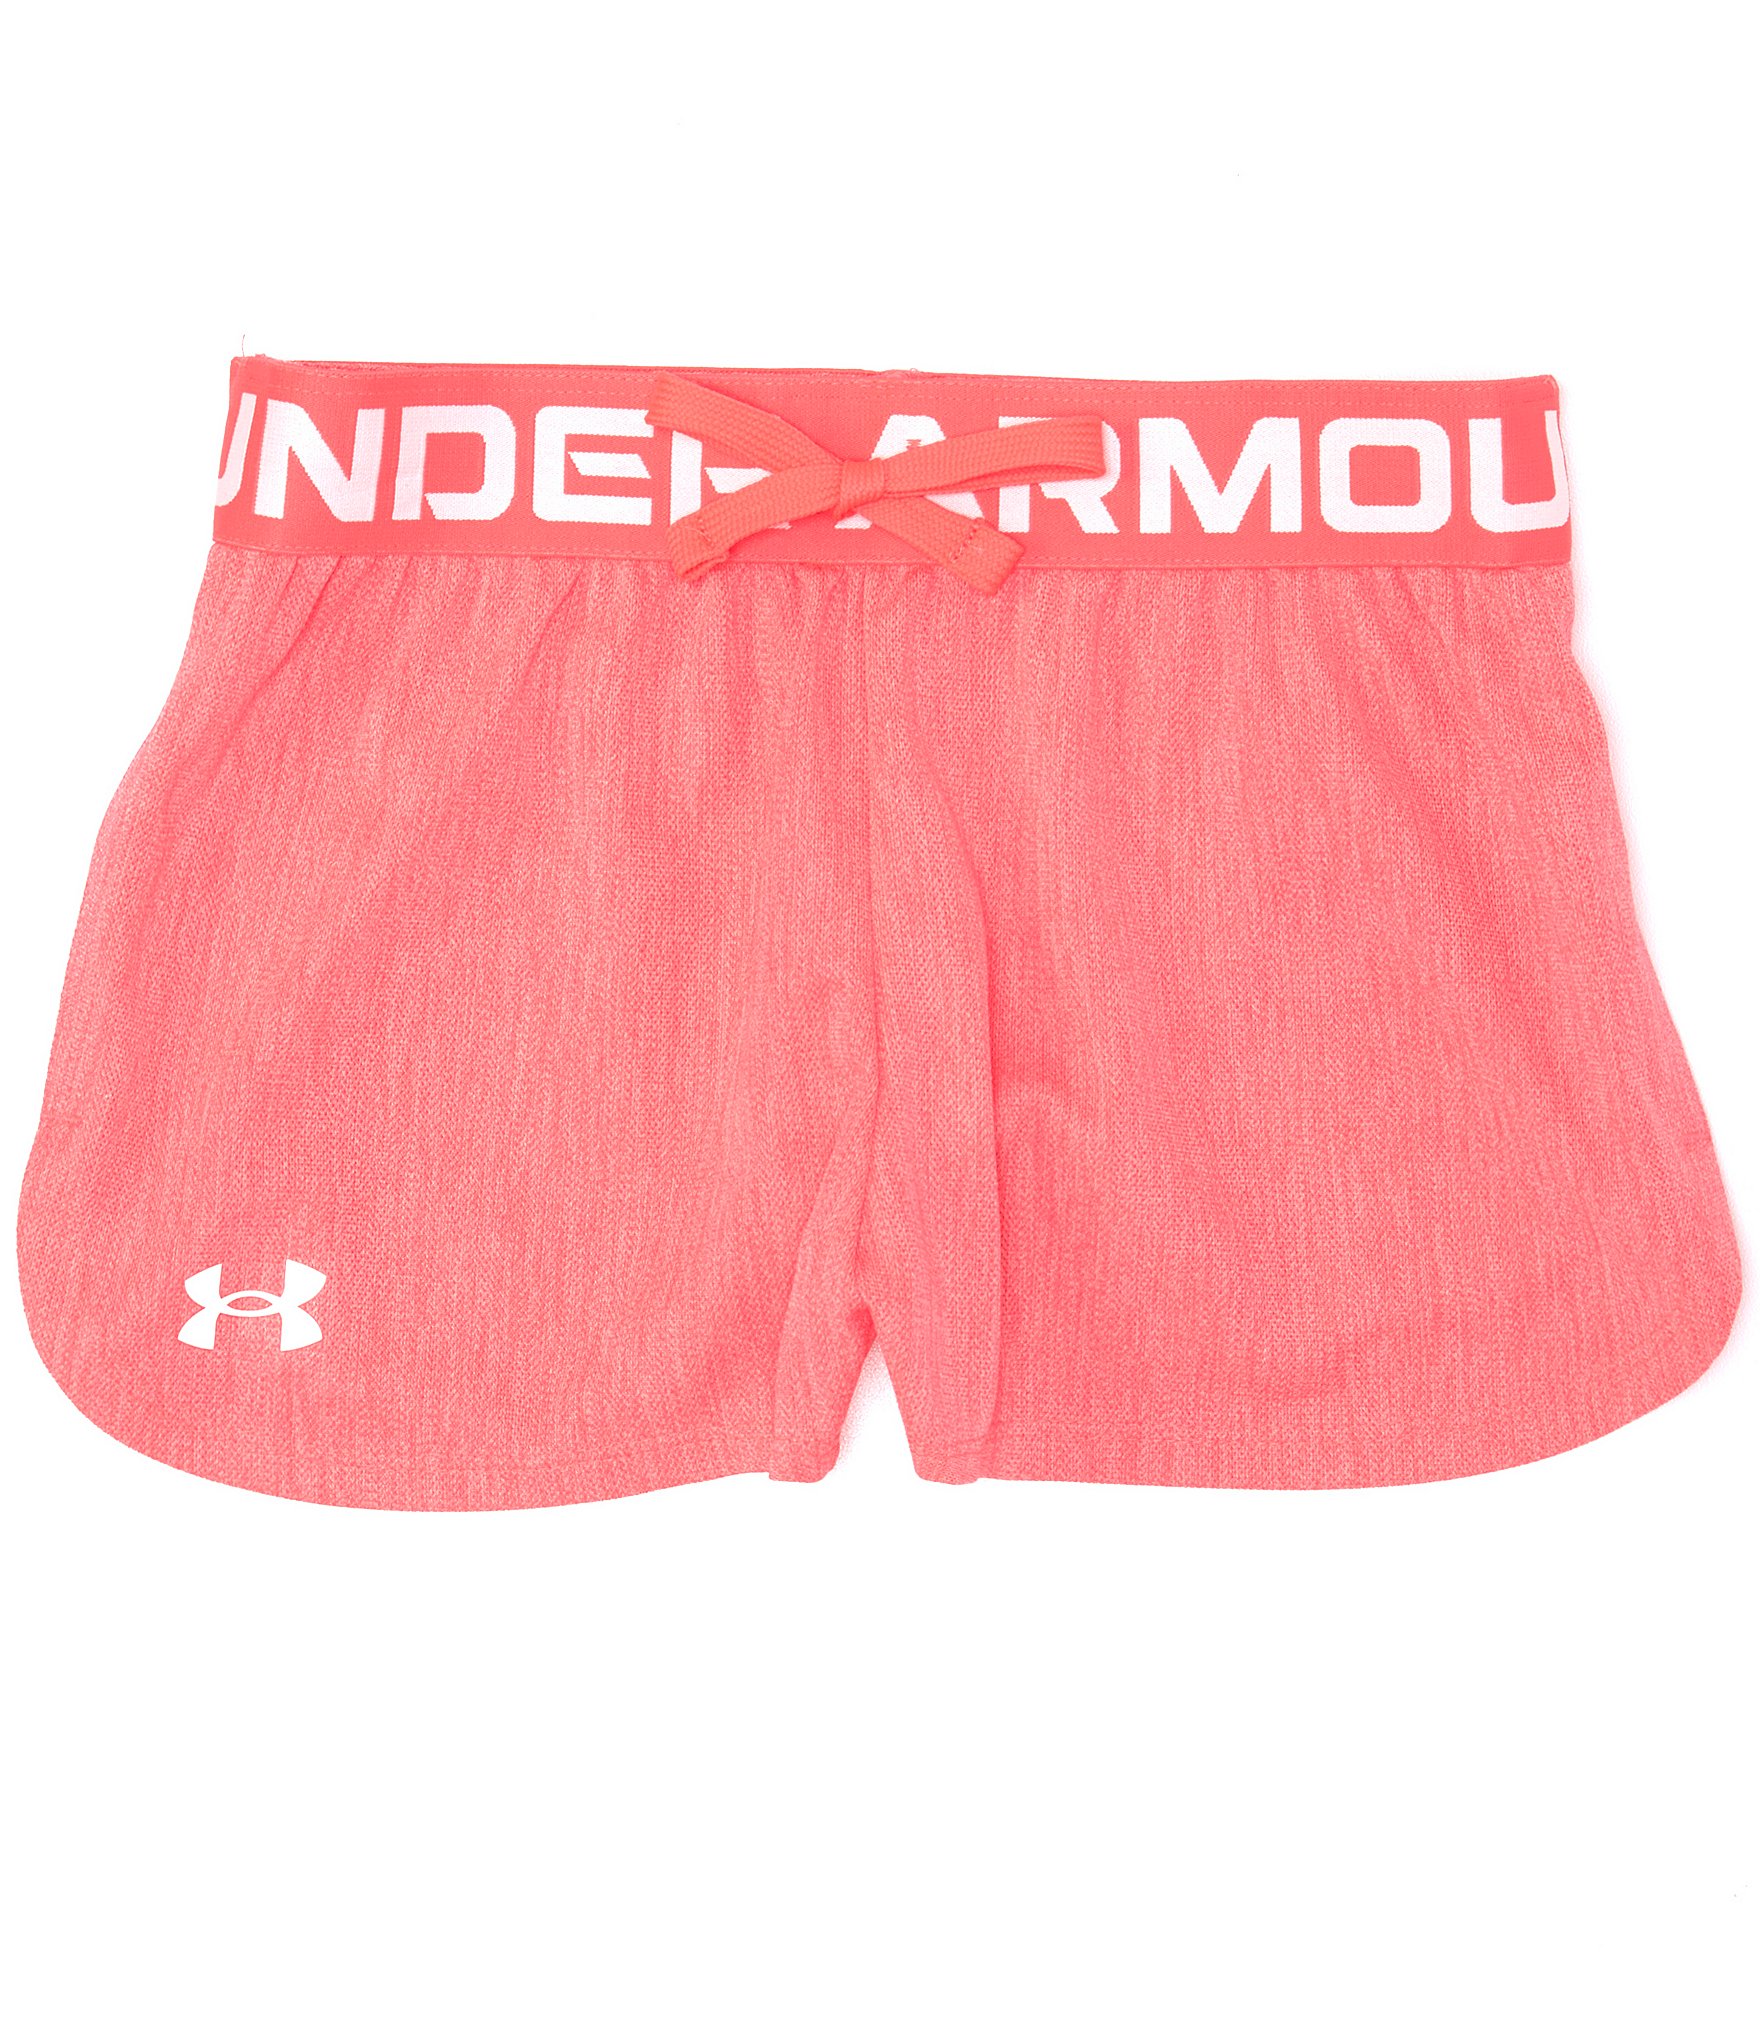 Under Armour Women's Play Up 3.0 Shorts Black Micro Pink size XX-Large XXL  Mujer